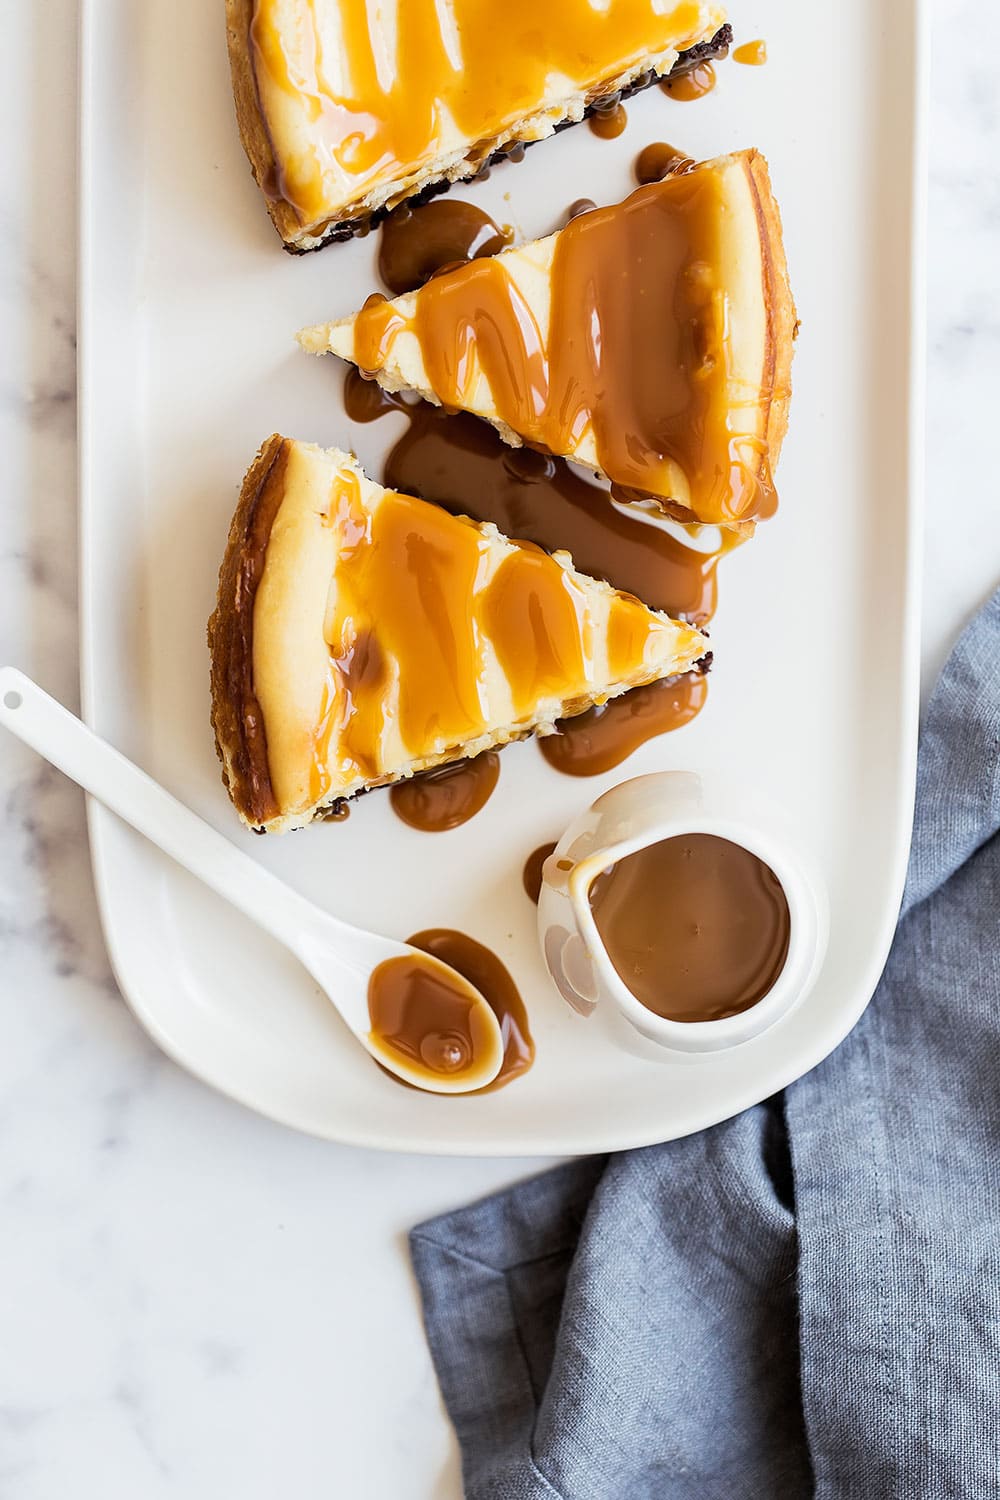 Caramel Brownie Cheesecake featured a thick fudgy brownie bottom with a luscious layer of creamy vanilla cheesecake all topped with salted caramel sauce. Every bite is heaven!